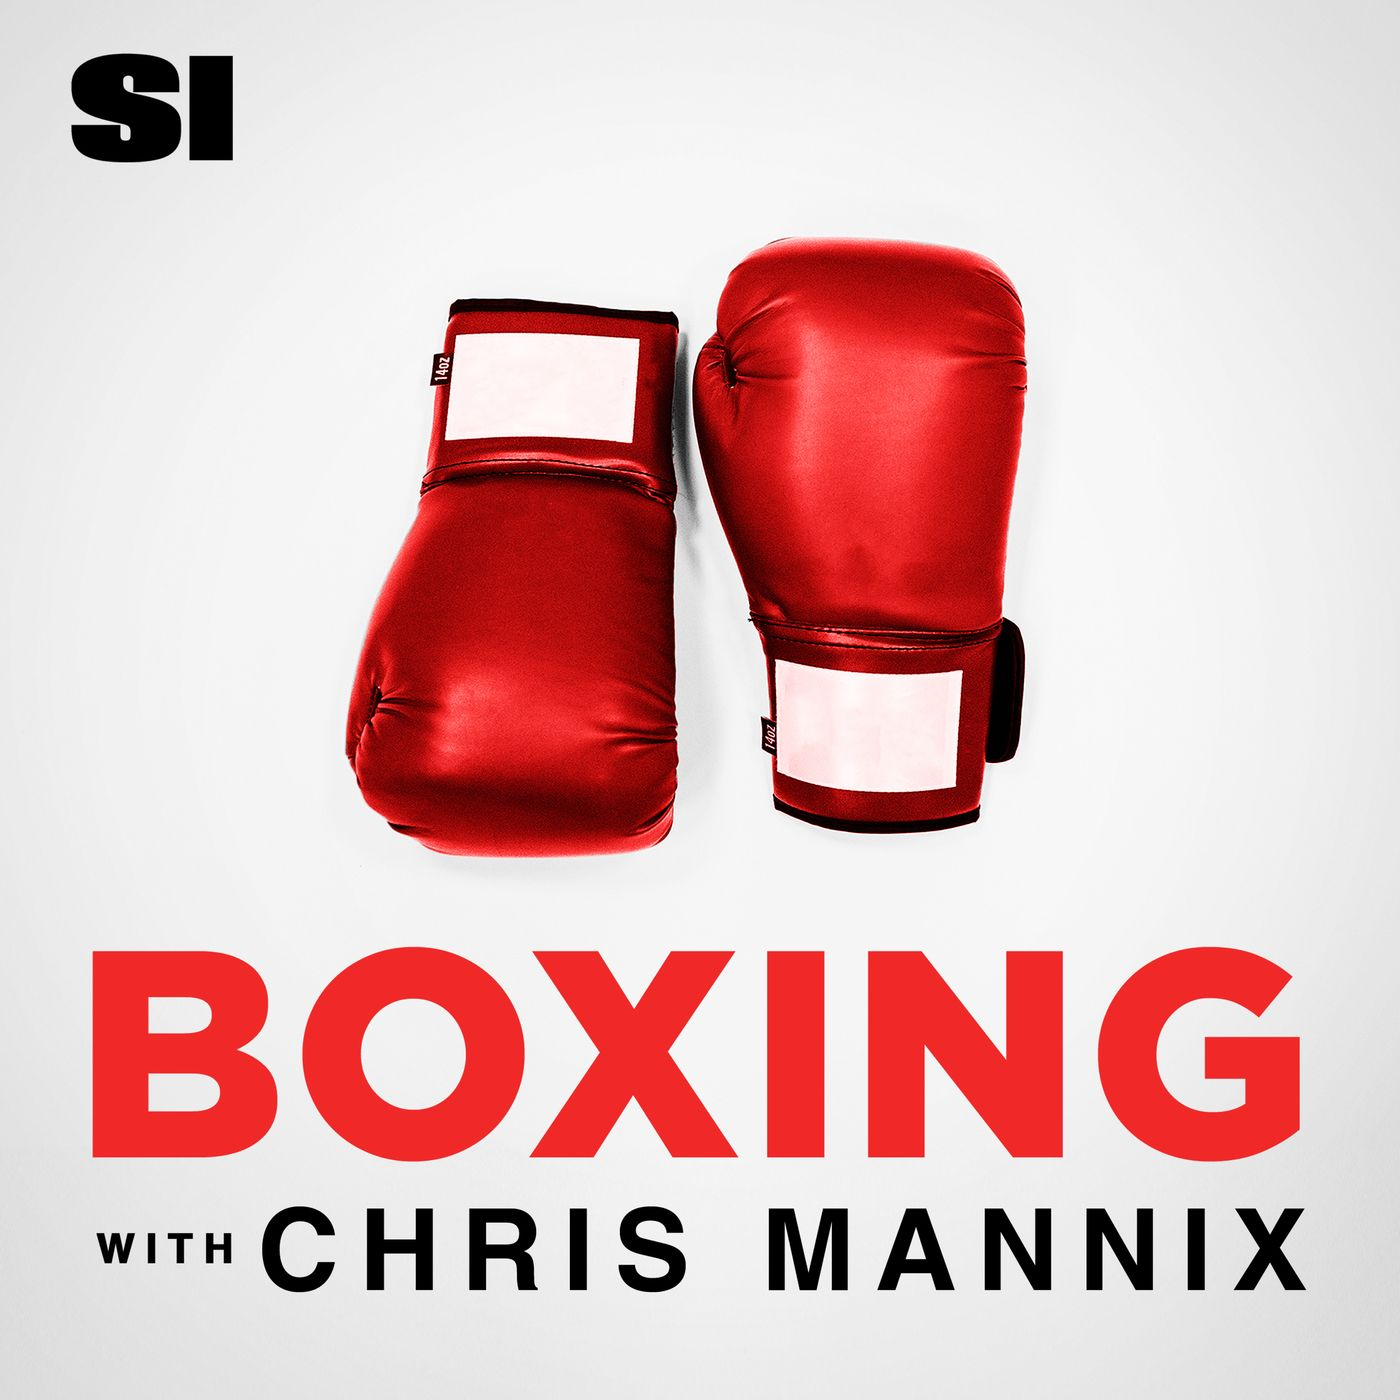 A highlight from Boxing with Chris Mannix - The Latest with Tank